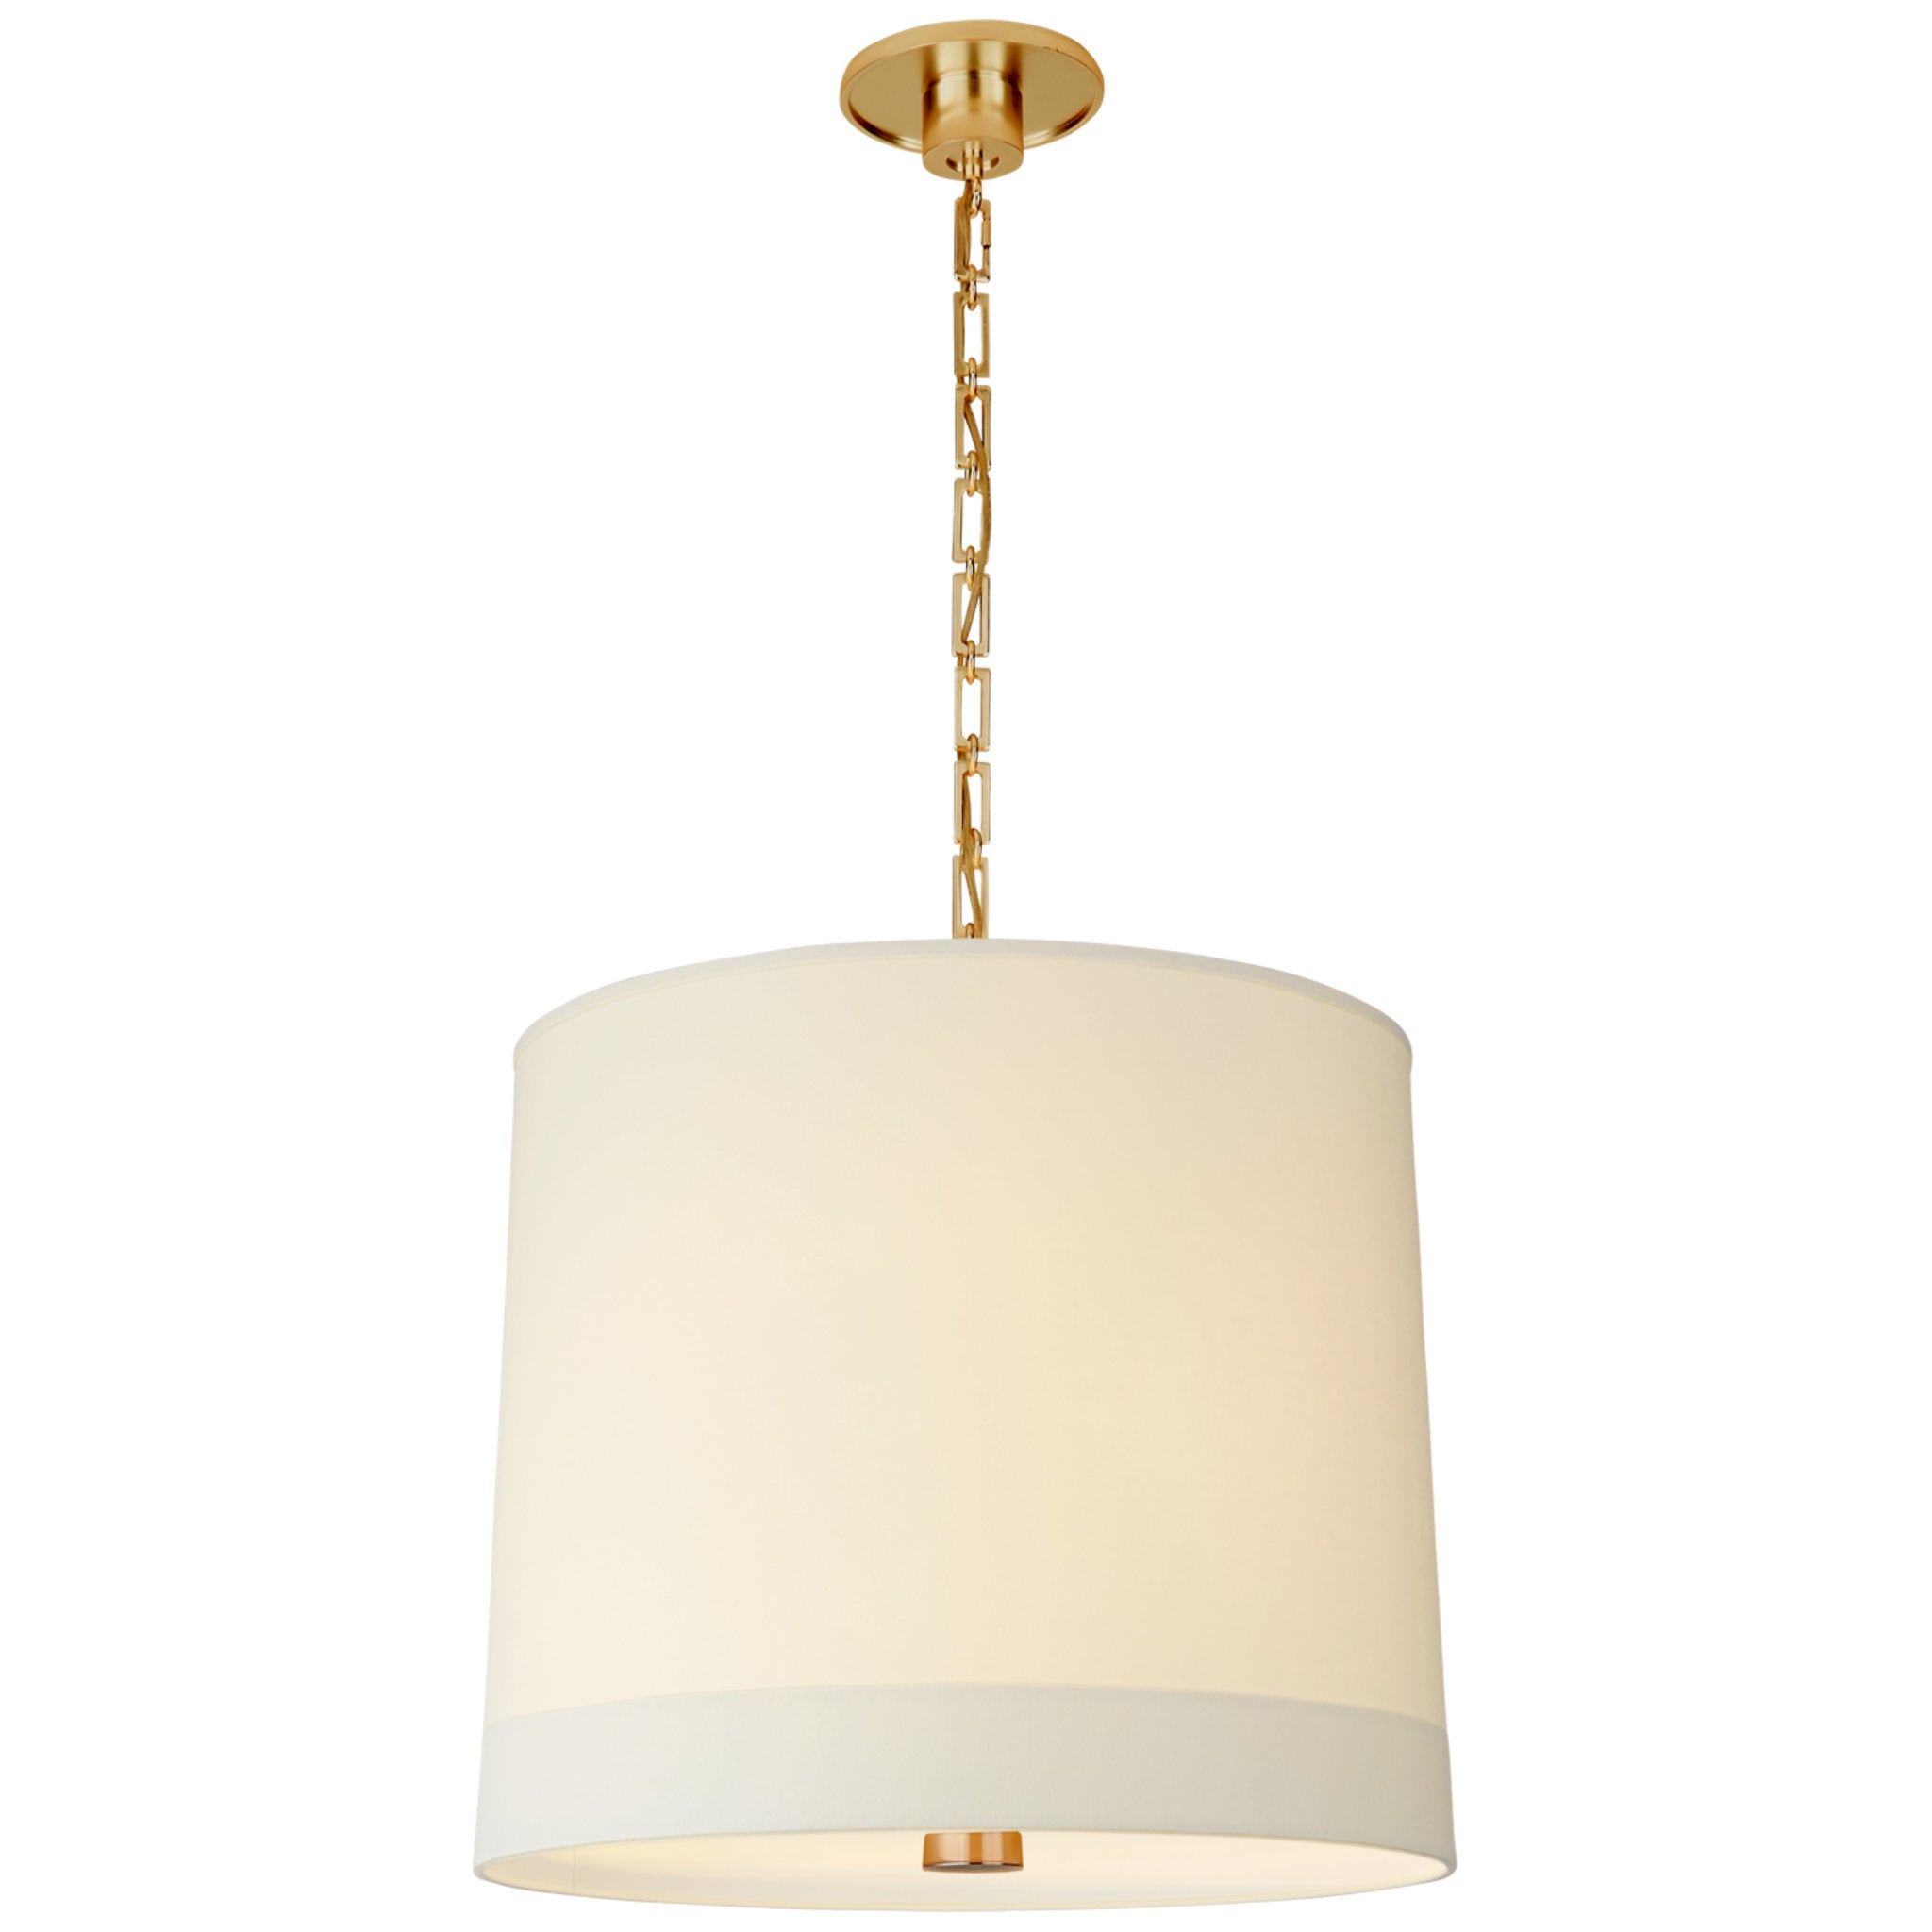 Barbara Barry Simple Banded Hanging Shade in Soft Brass with Silk Banded Shade